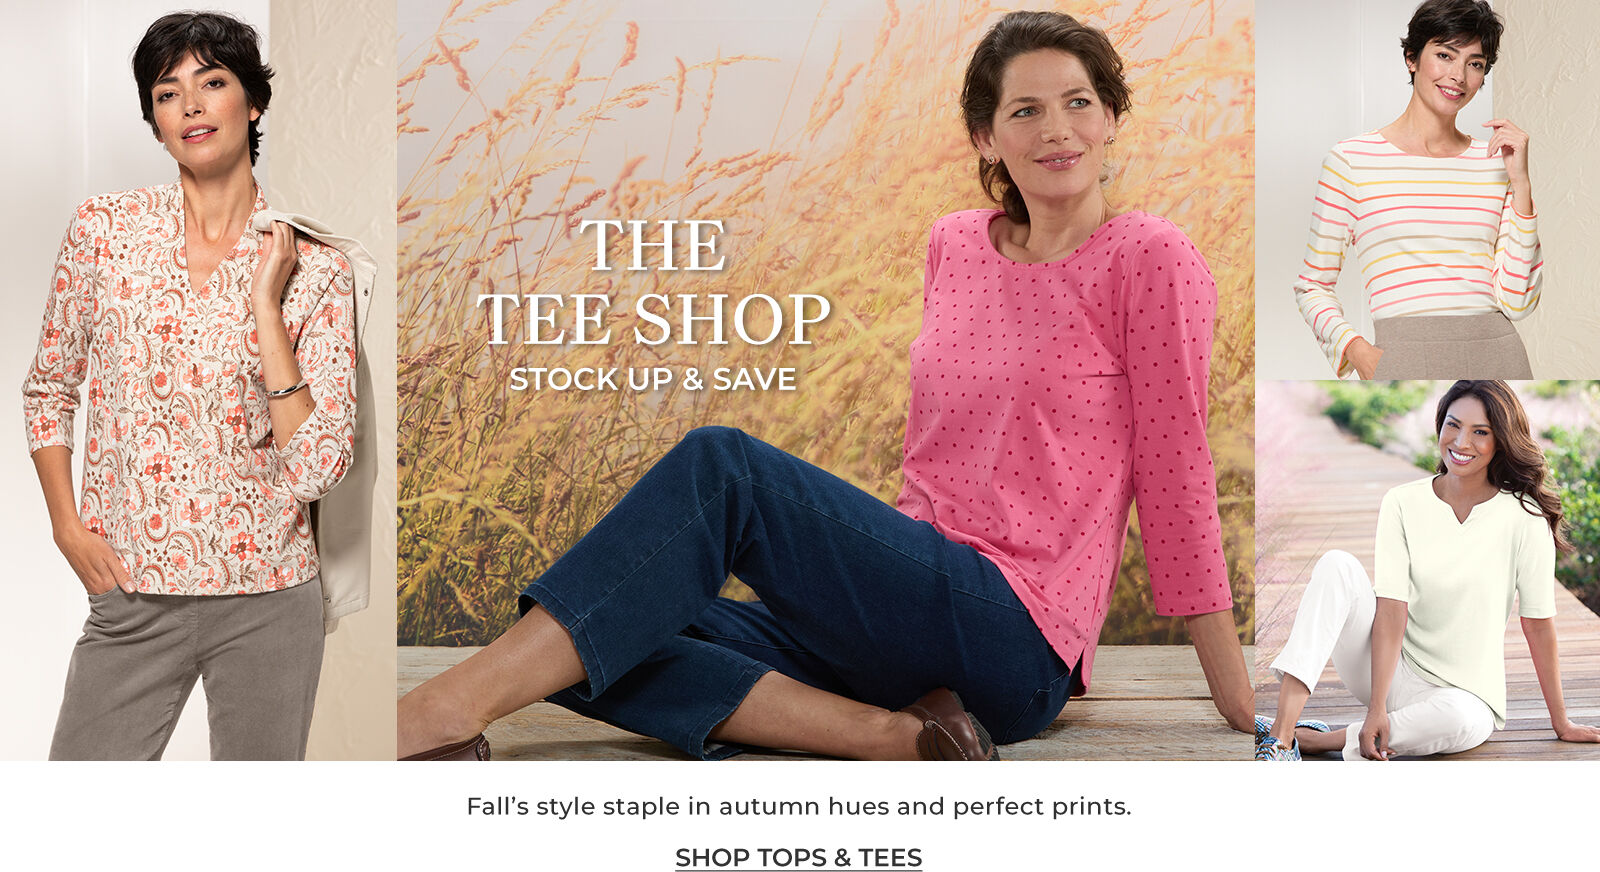 the tee shop stock up & save fall's style staple in autumn hues and perfect prints shop tops & tees